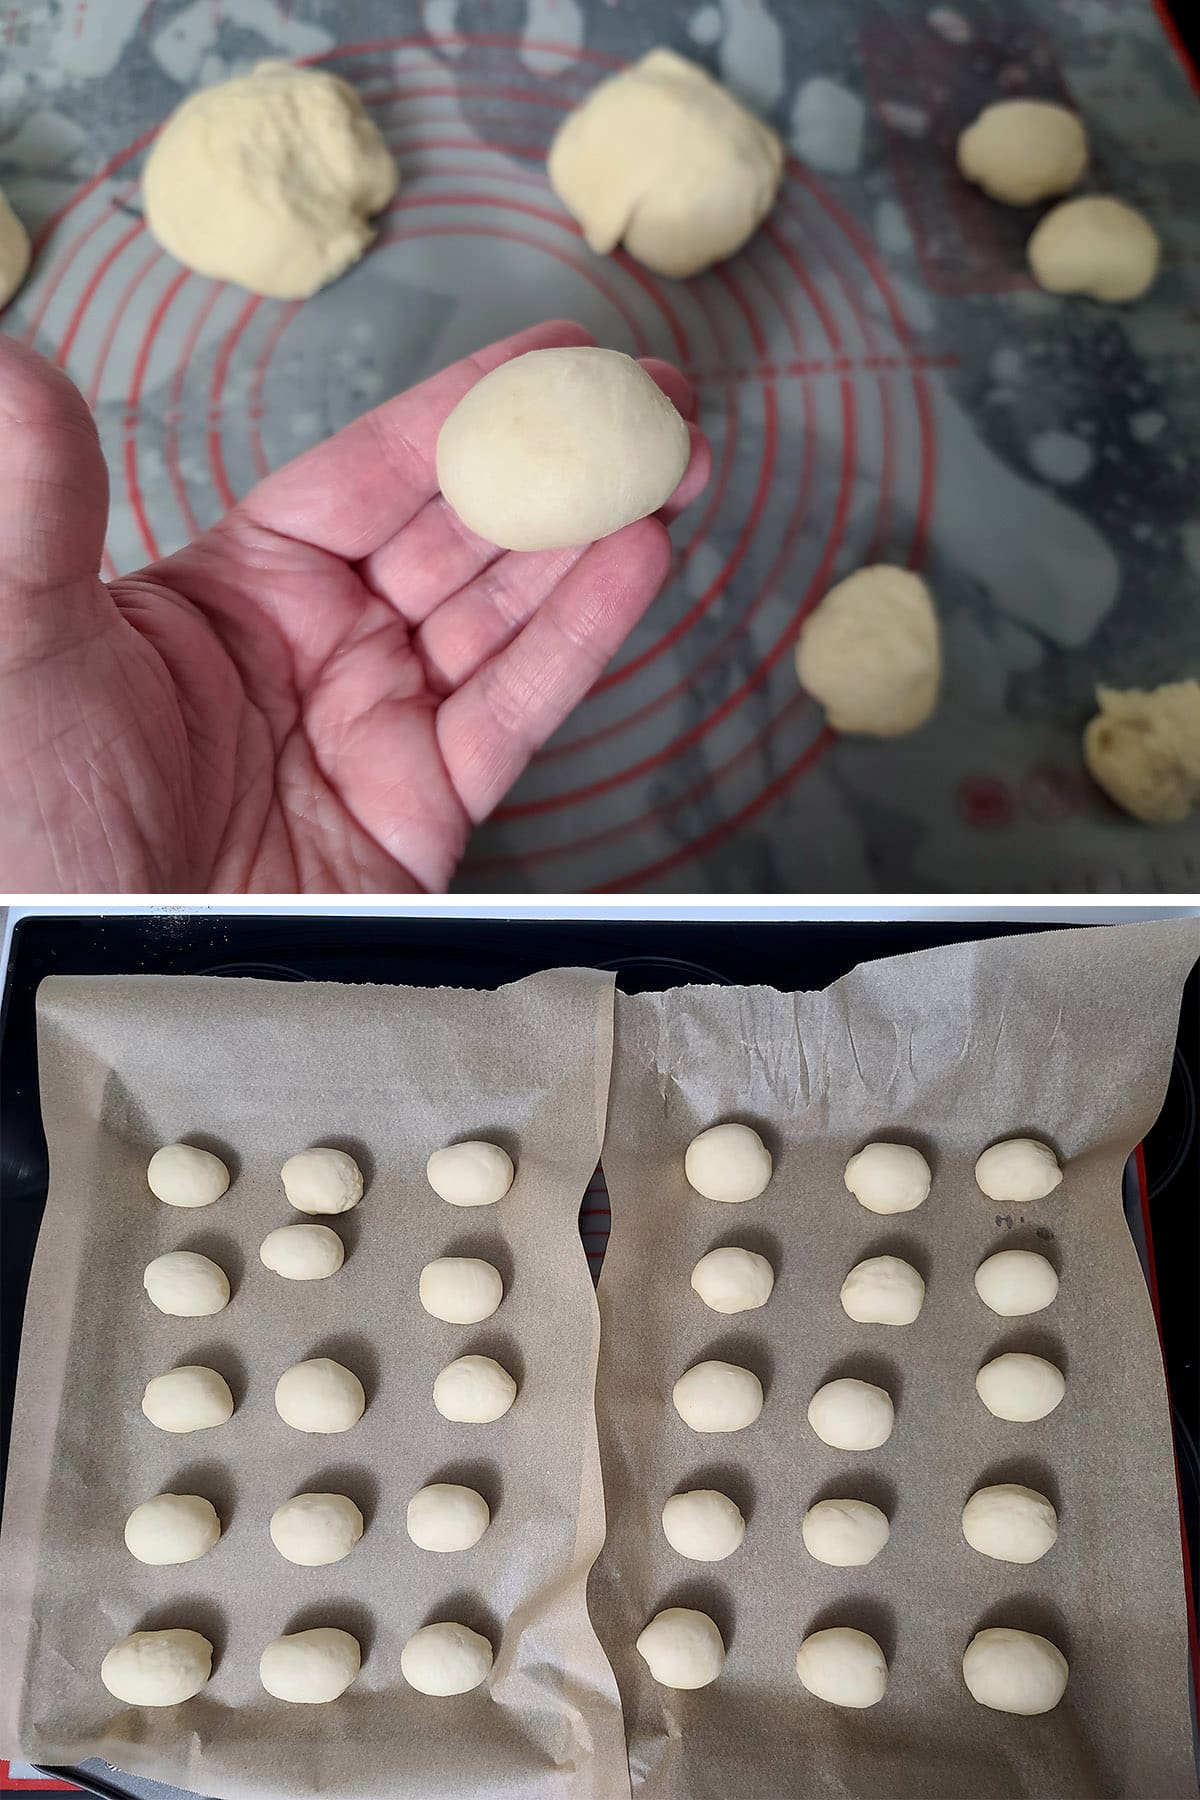 A 2 part image showing a piece of dough rolled into an oblong ball, then 30 oblong dough balls across 2 parchment lined baking sheets.